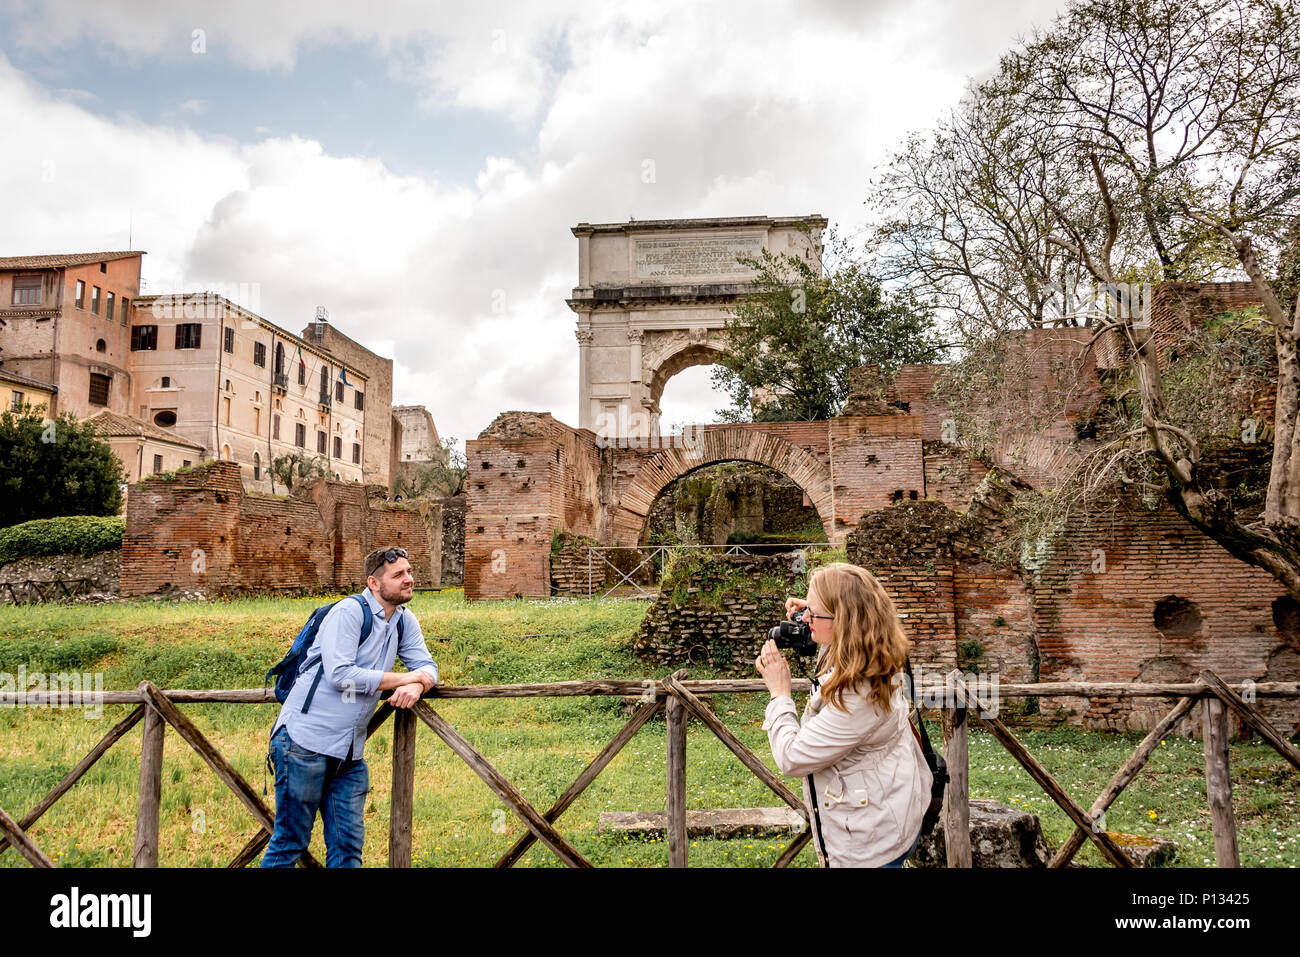 Roman Forum, a man poses for a photo among the ancient ruins found in the city center, a woman holds the camera as he leans on fence for a picture. Stock Photo